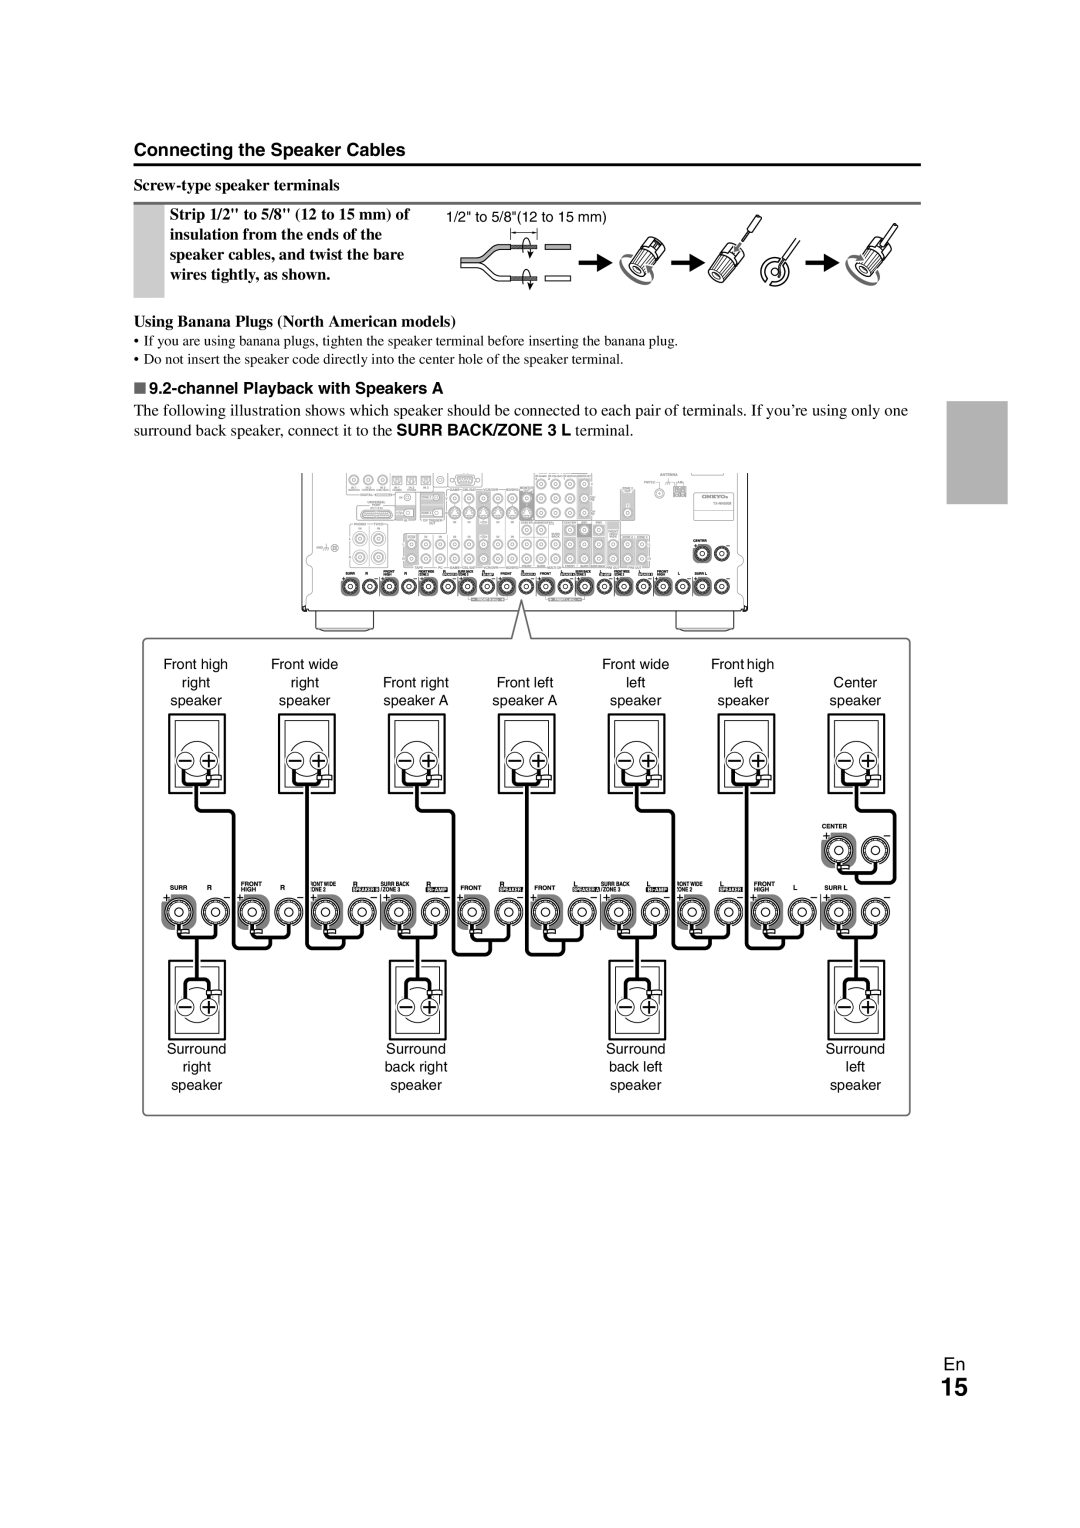 Onkyo TX-NR3008 instruction manual Connecting the Speaker Cables, channelPlayback with Speakers A 